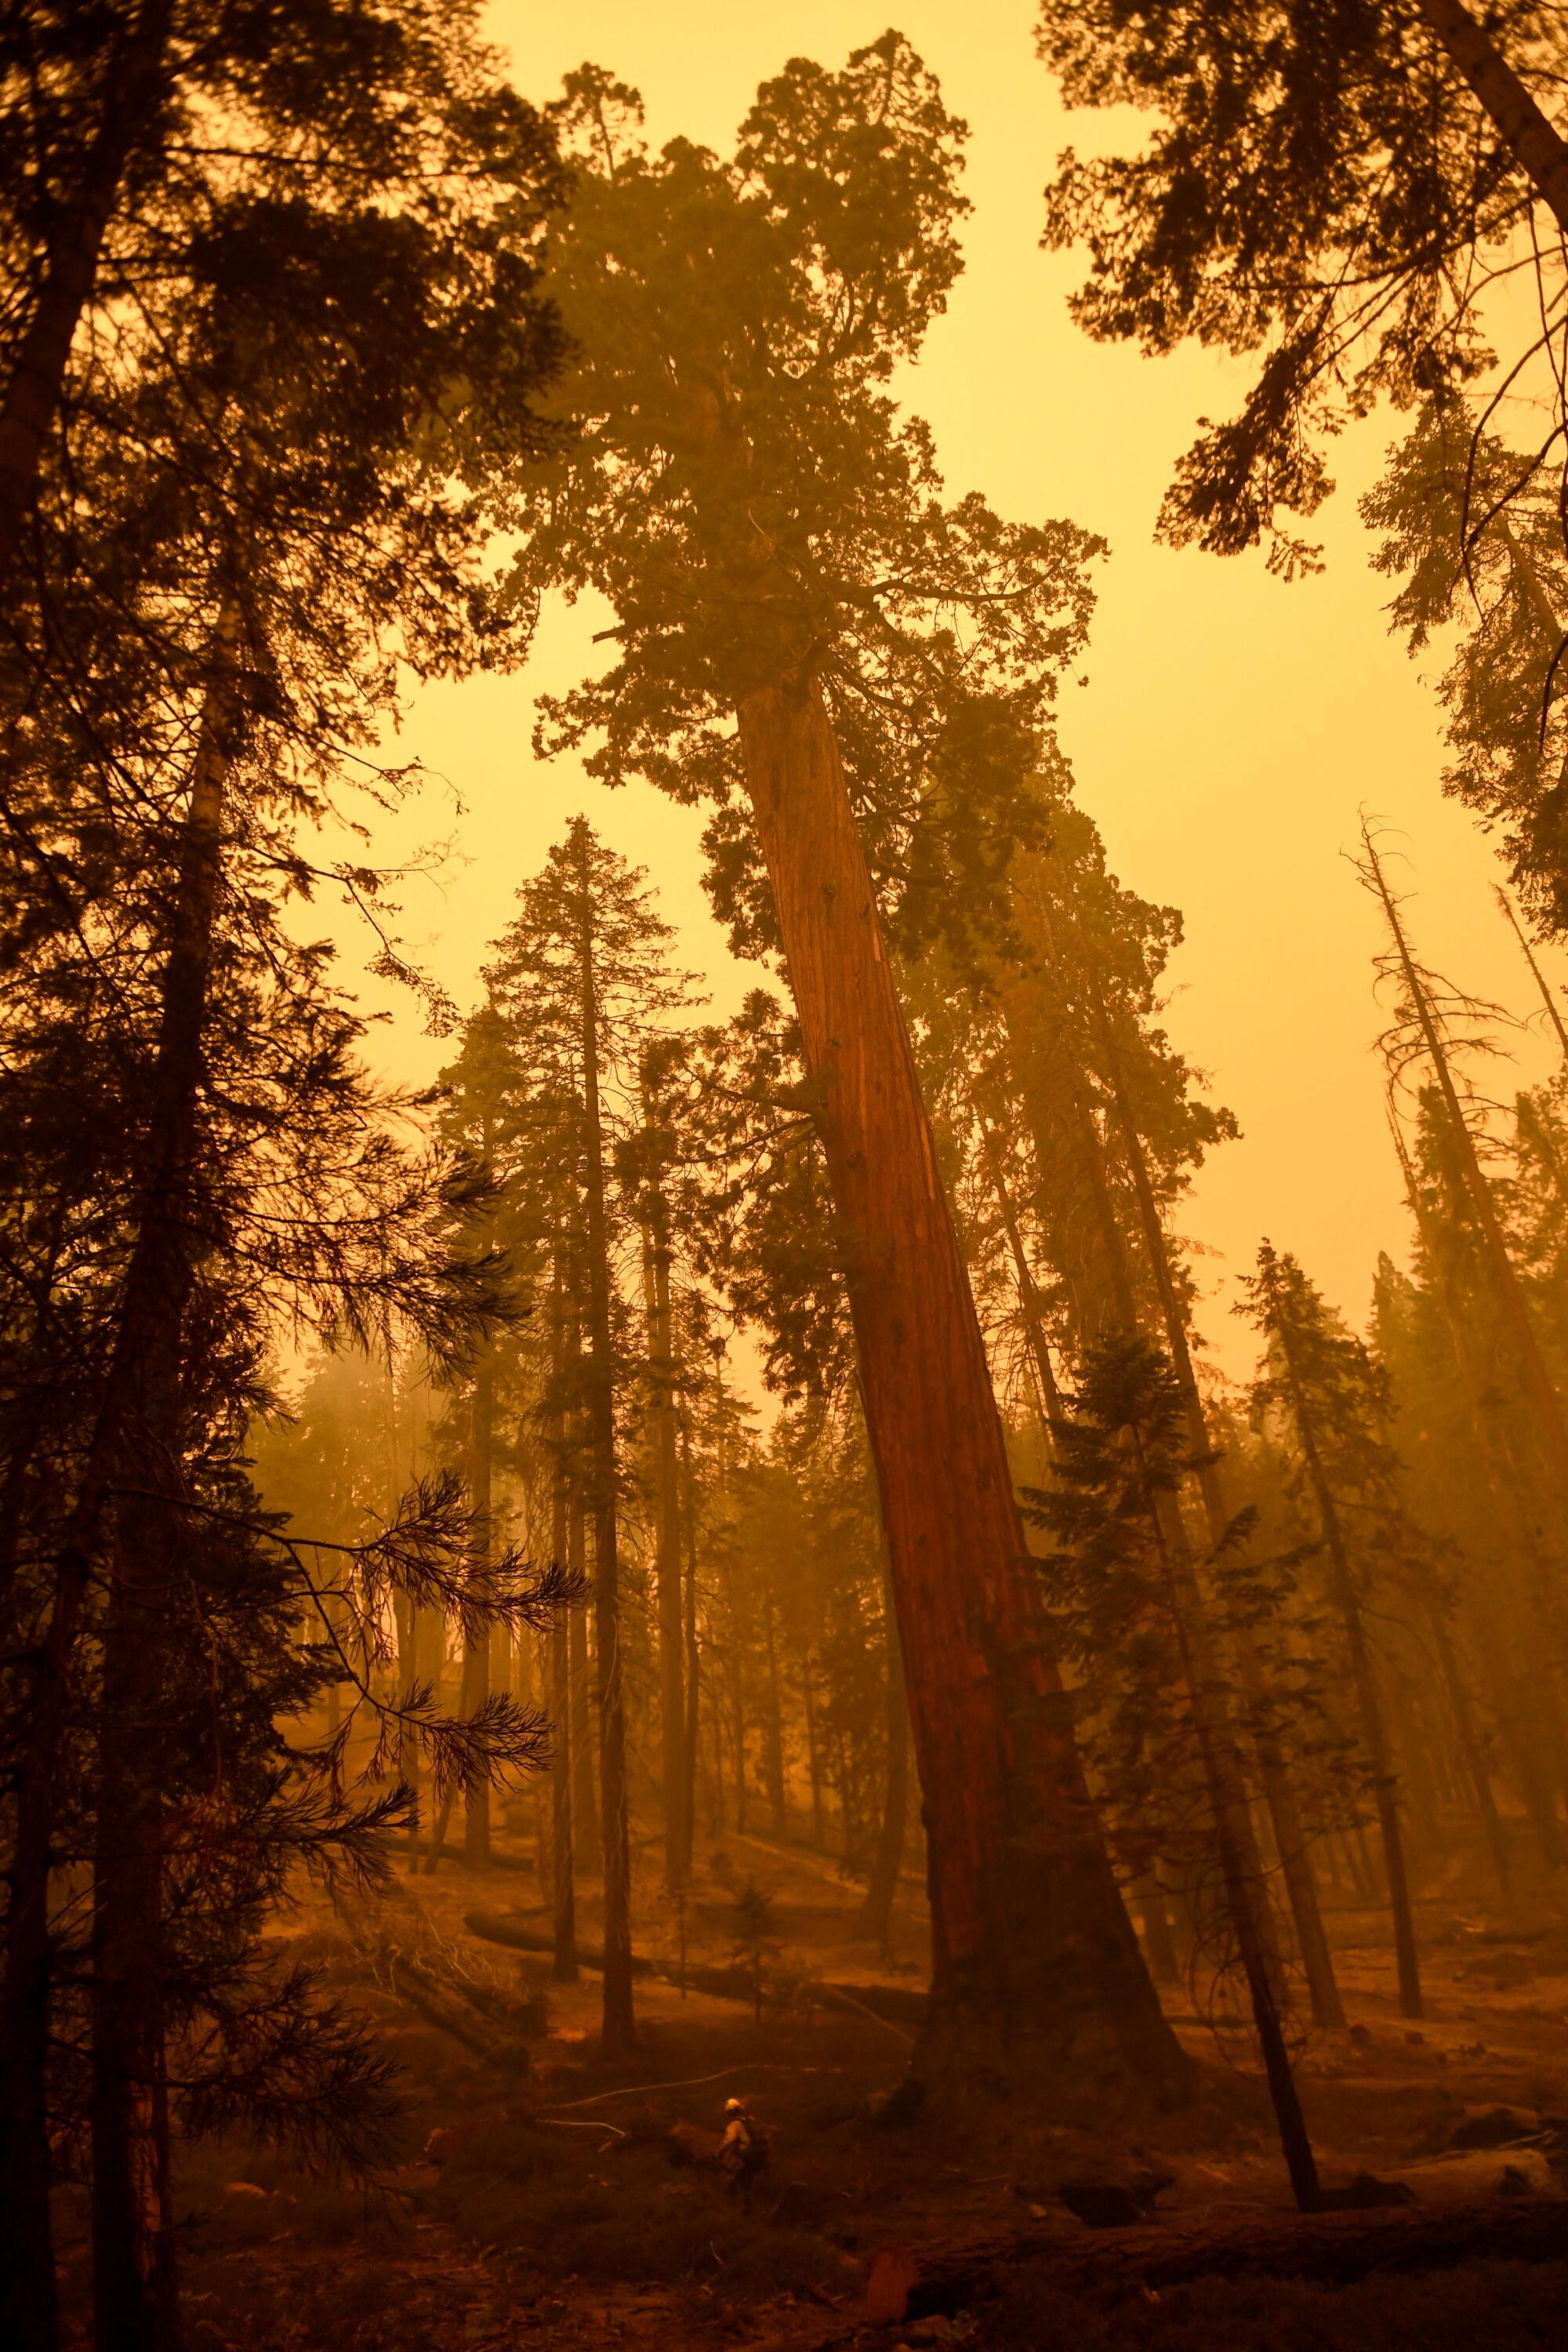 A firefighter is surrounded by tall trees and an orange, smoky sky 